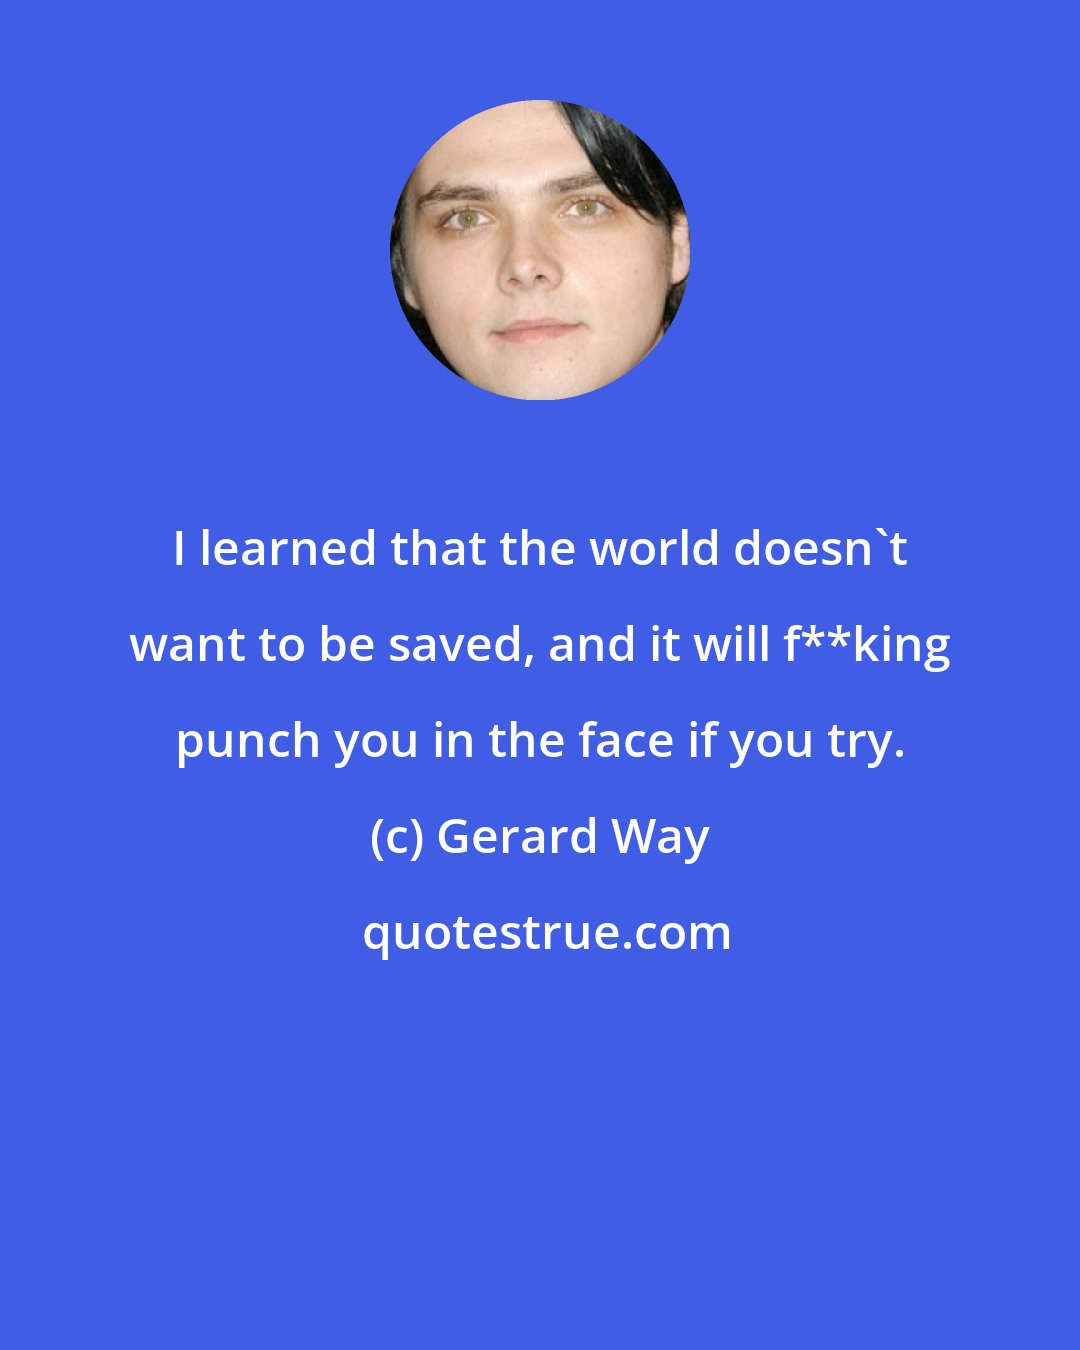 Gerard Way: I learned that the world doesn't want to be saved, and it will f**king punch you in the face if you try.